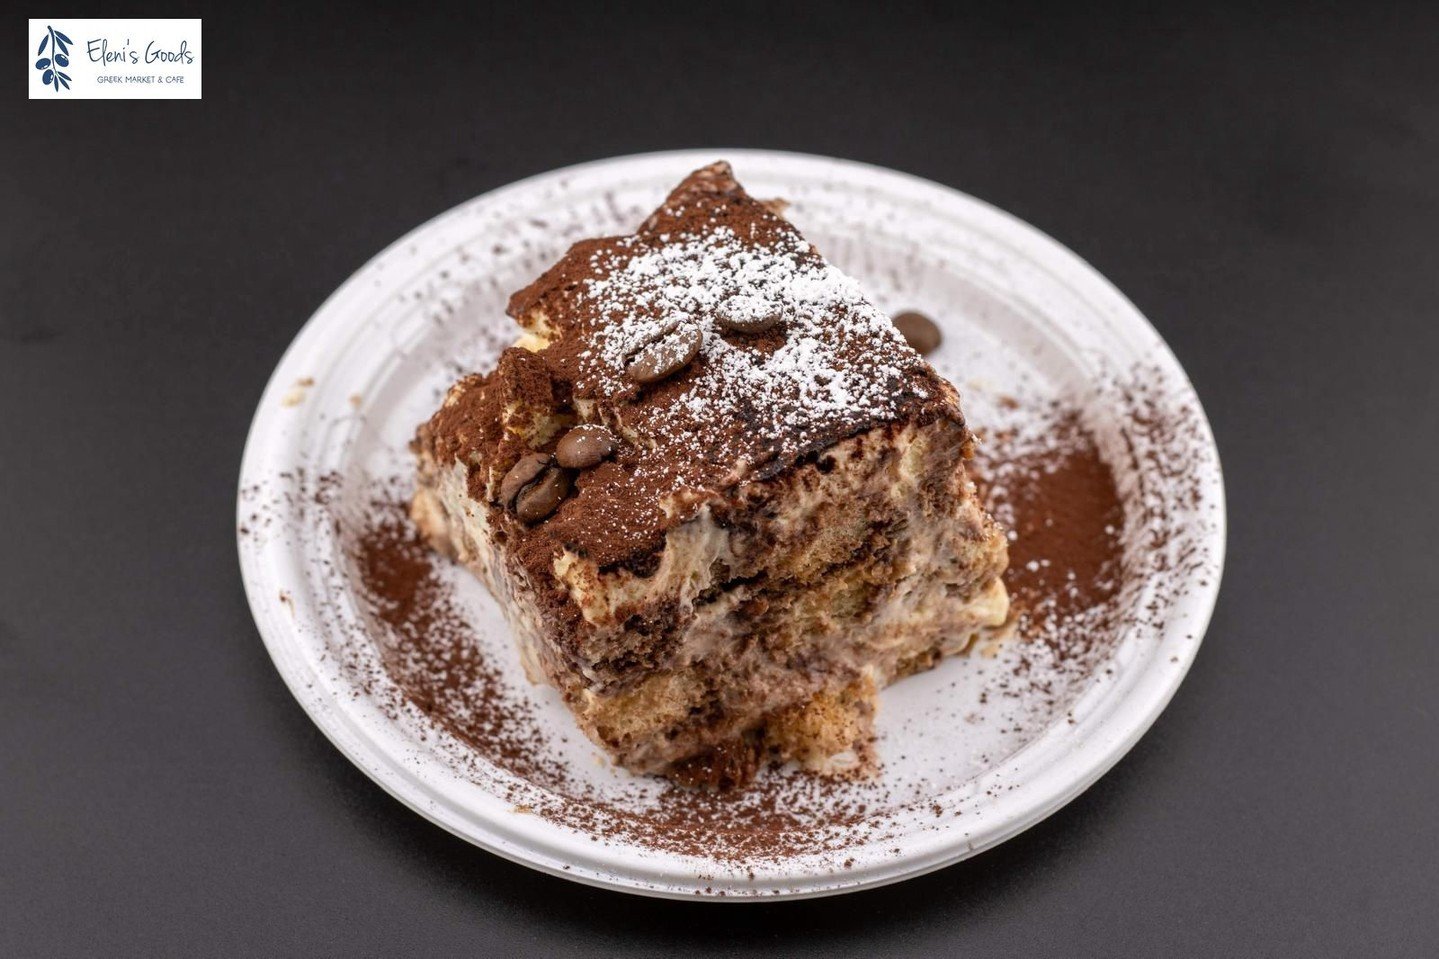 Savor the cool elegance of our freshly made Tiramisu! 🍨✨ Indulge in layers of delicate ladyfingers, rich mascarpone cream, and a hint of espresso, all expertly crafted for a refreshing twist on this classic dessert. #ElenisCafe #Elenisgoods #Freddom